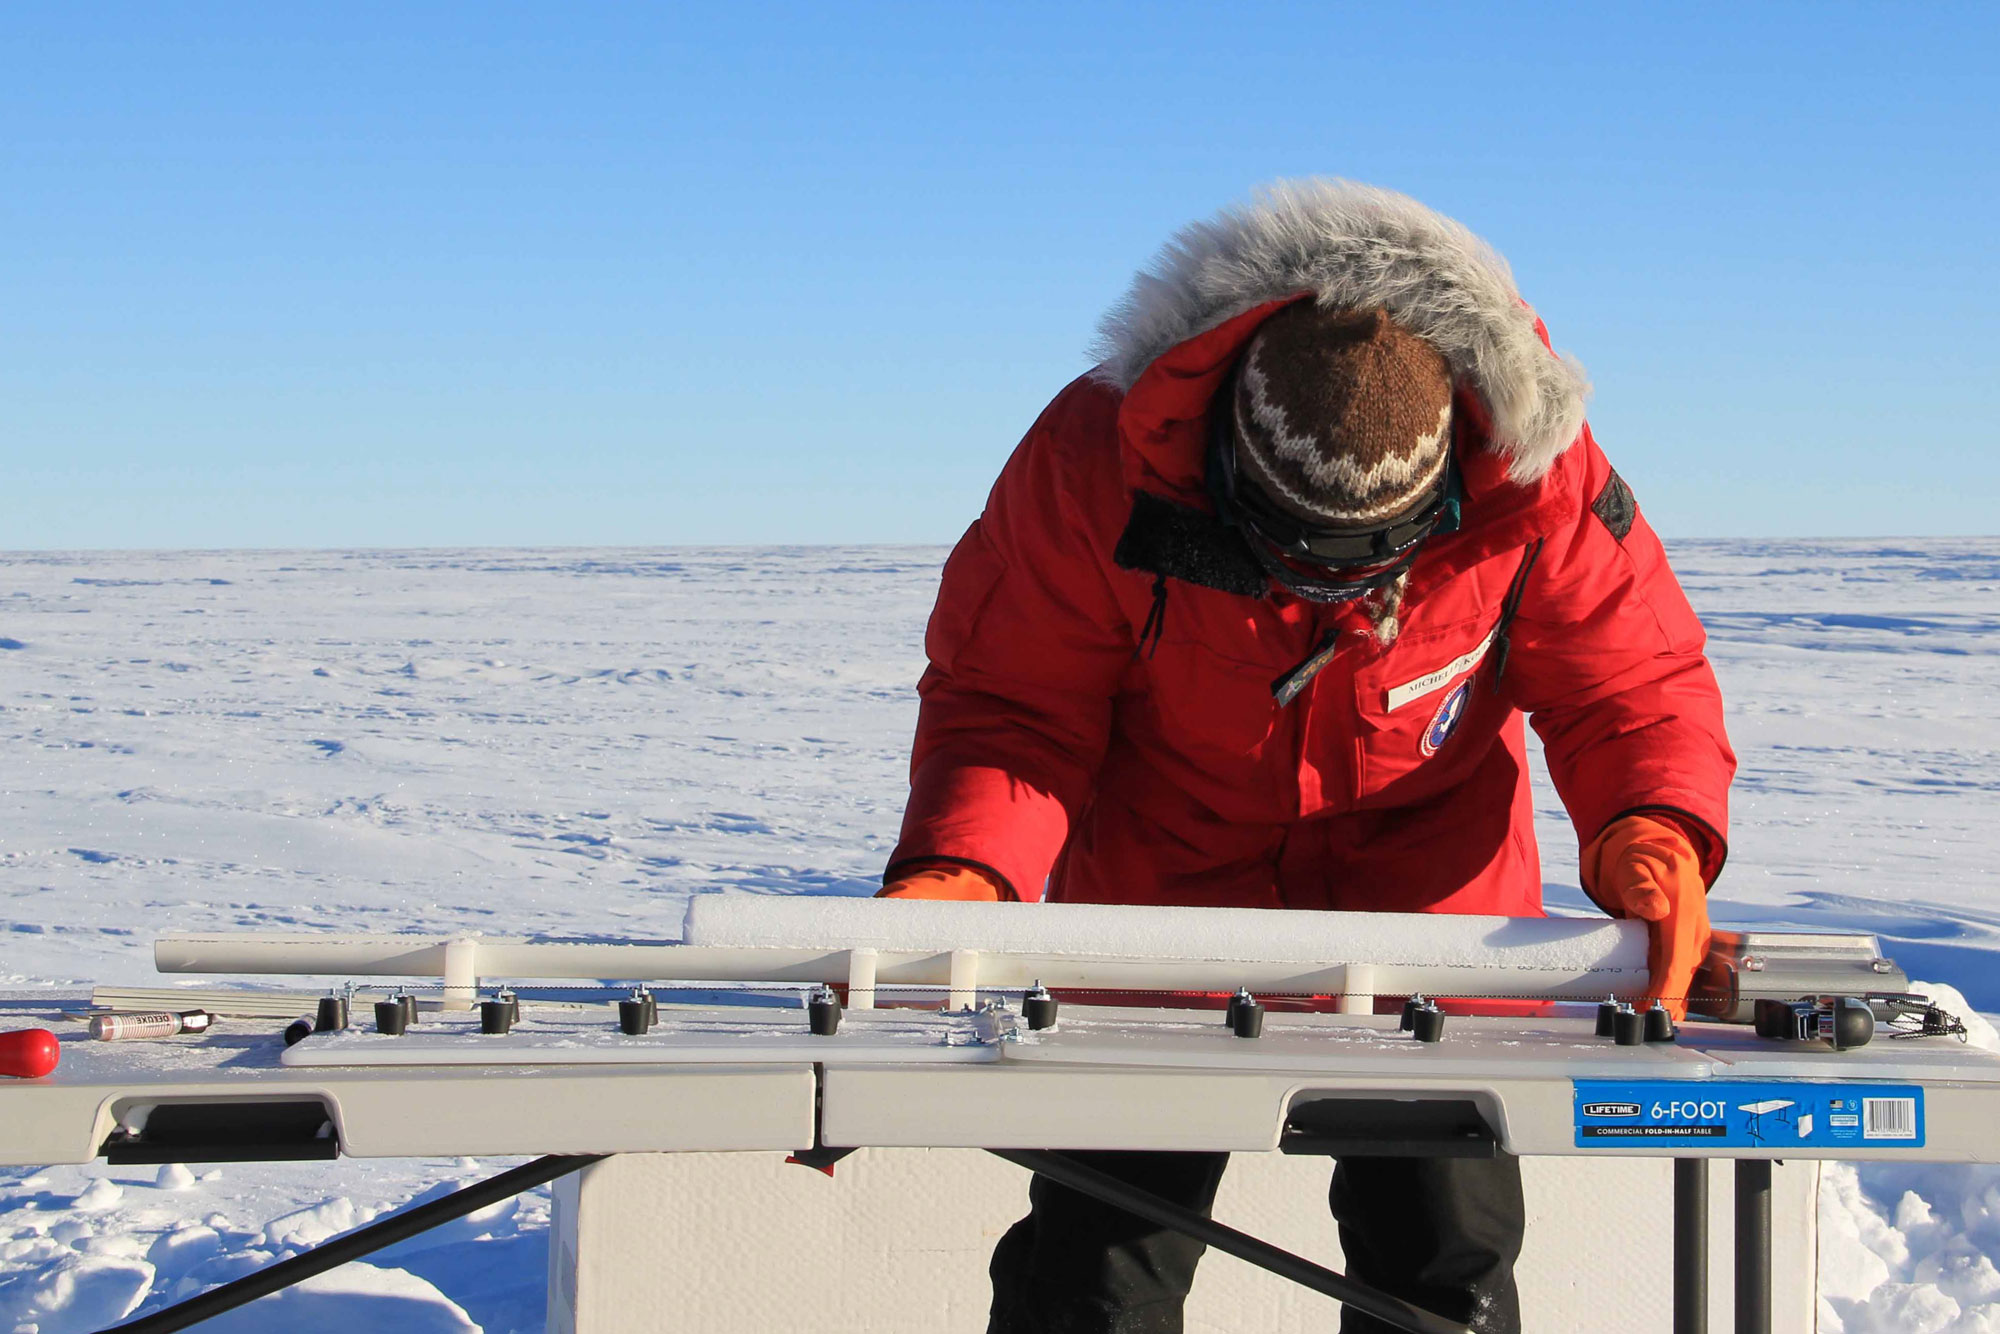 Photograph of a researcher measuring an ice core in Antarctica.